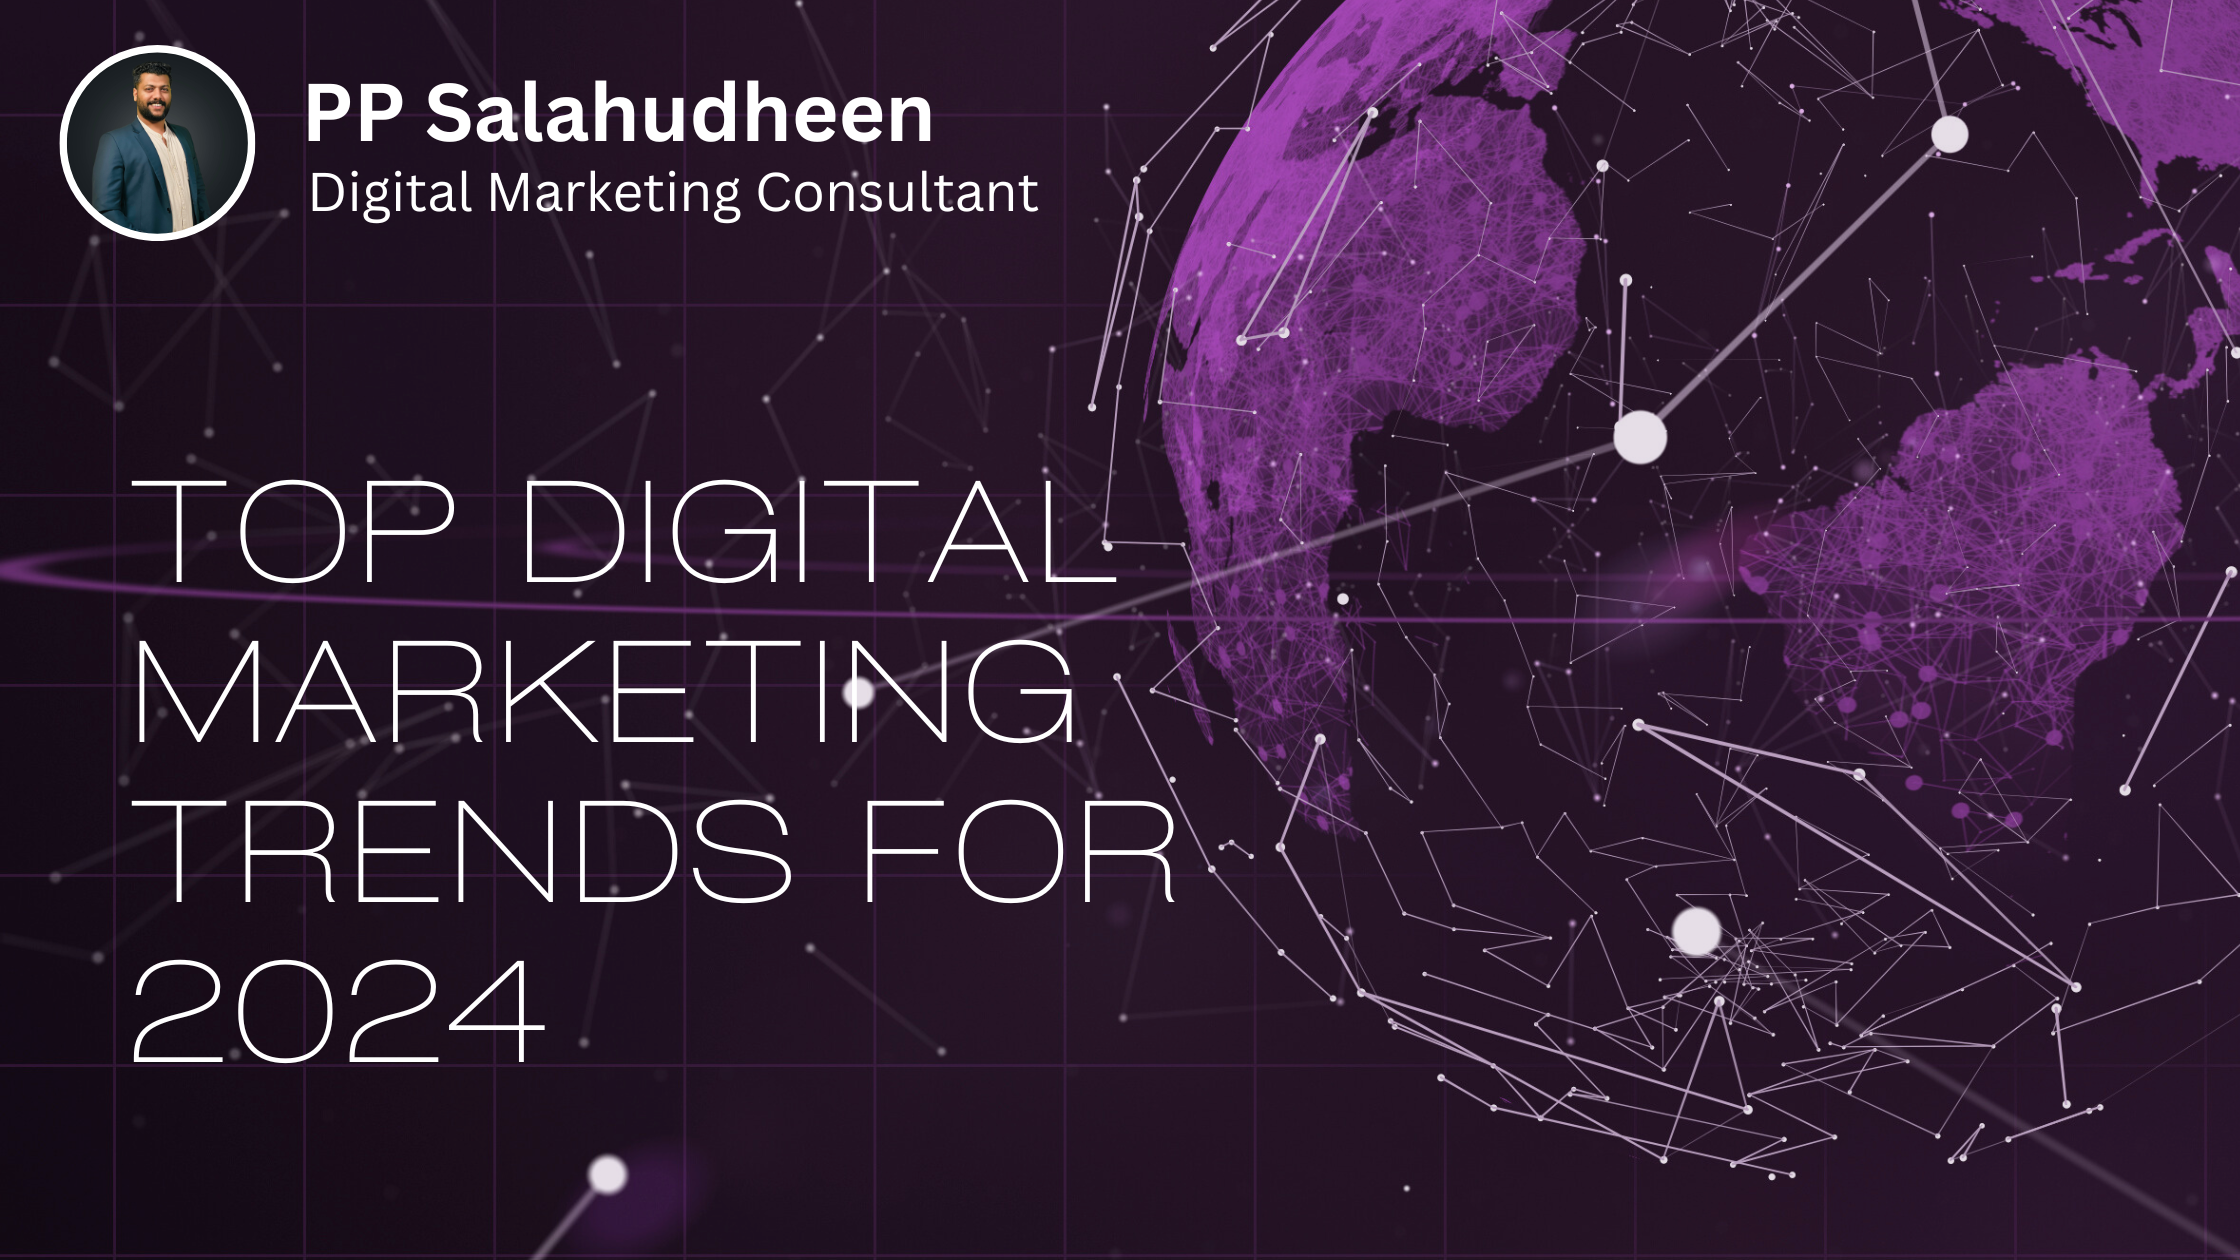 Stay Ahead of the Curve: Top Digital Marketing Trends for 2024